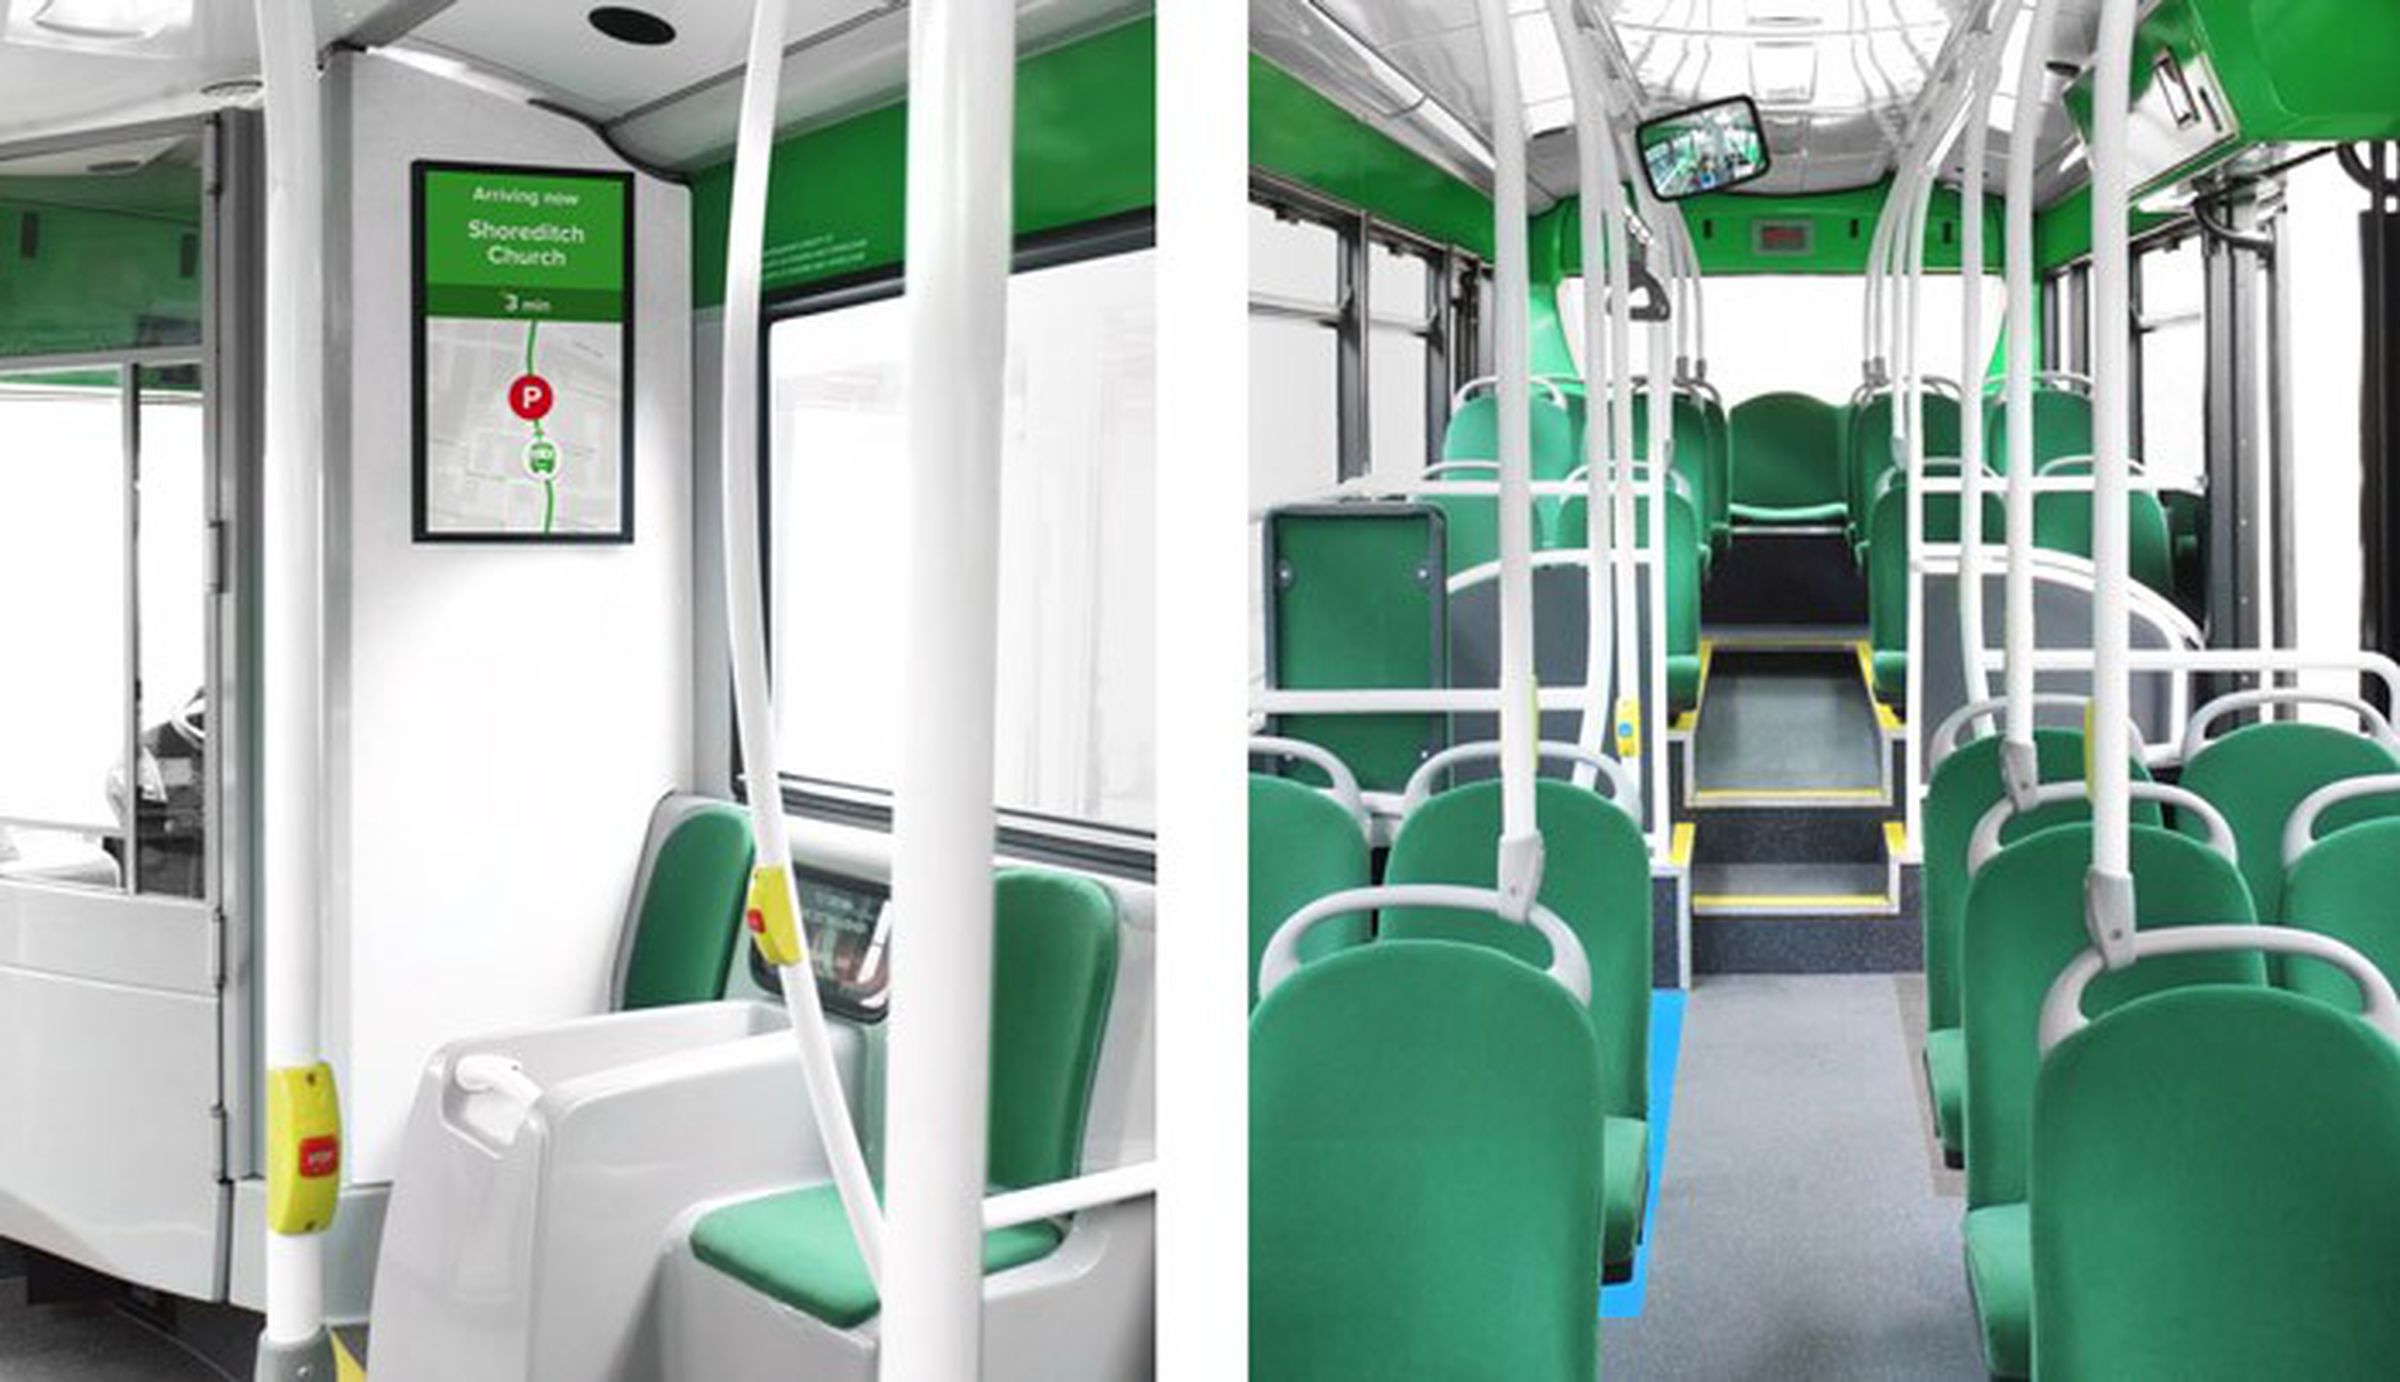 The interior of Citymapper’s buses match the app’s green theme. 